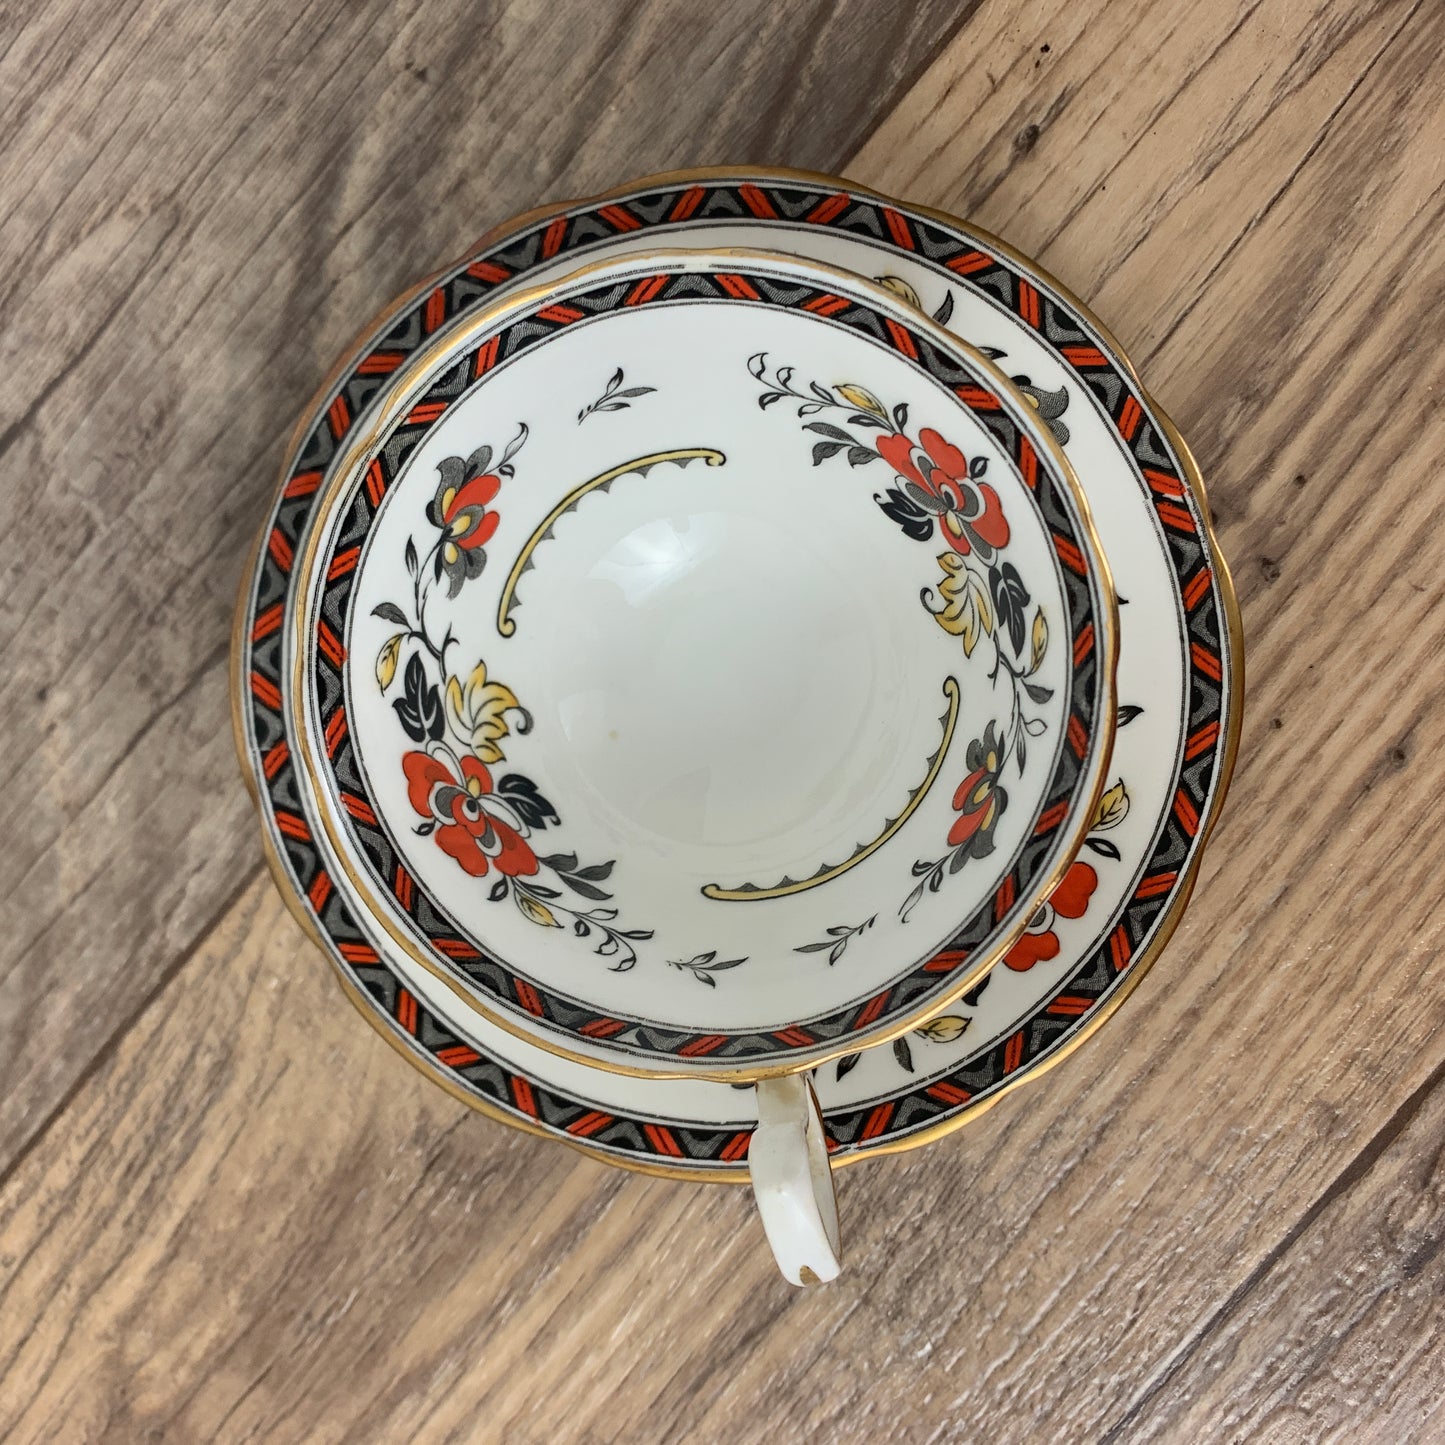 Aynsley Vintage Teacup and Saucer with Black and Orange Pattern